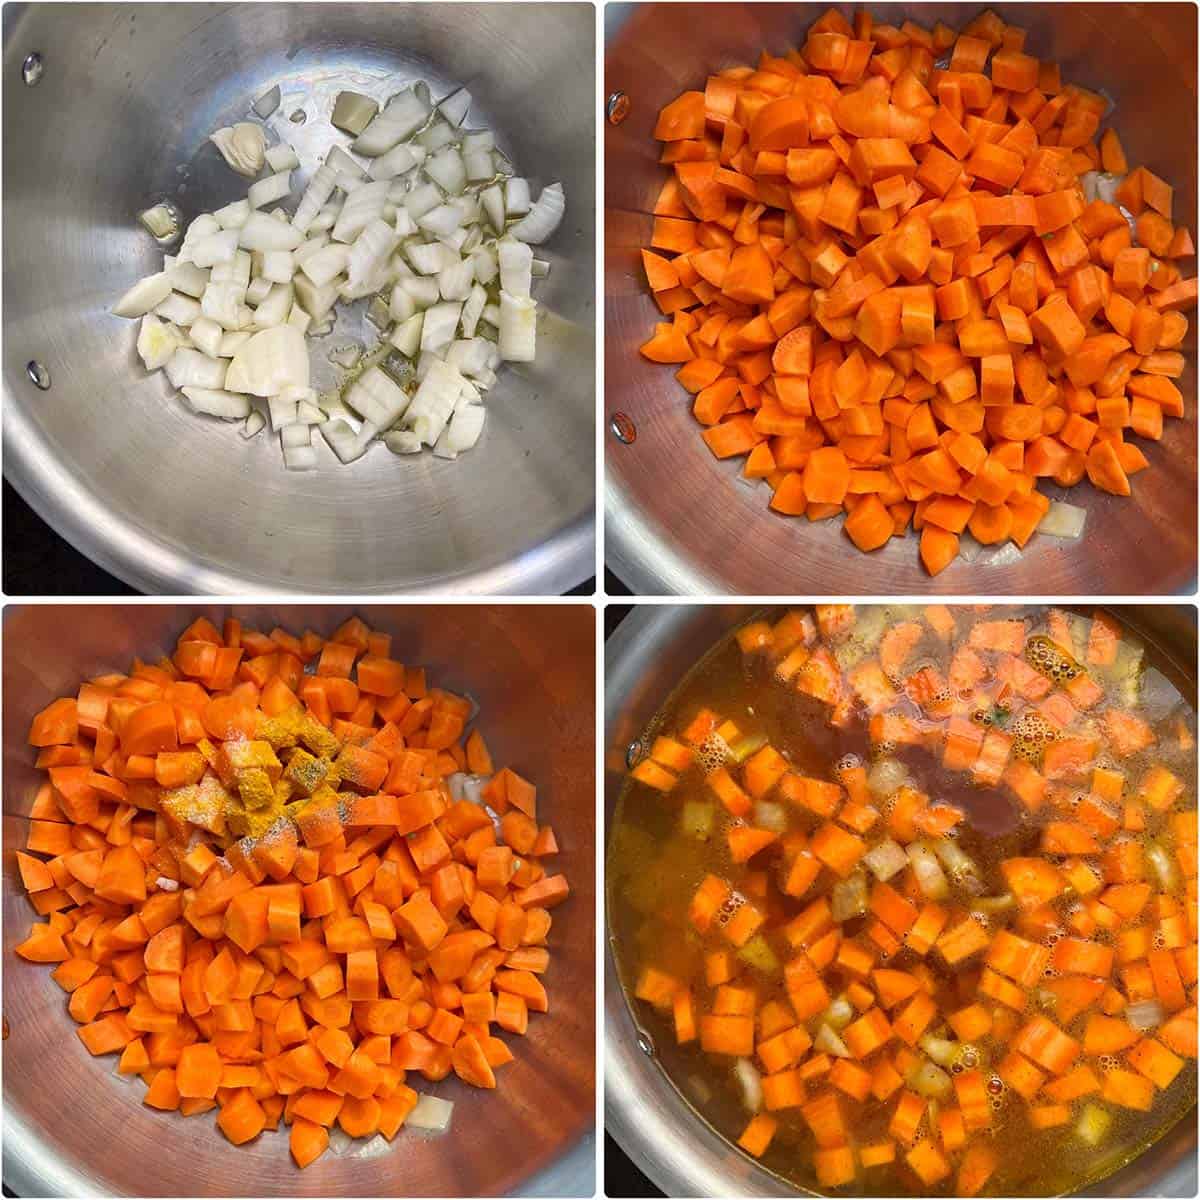 4 panel photo showing the sautéing and simmering of carrots.